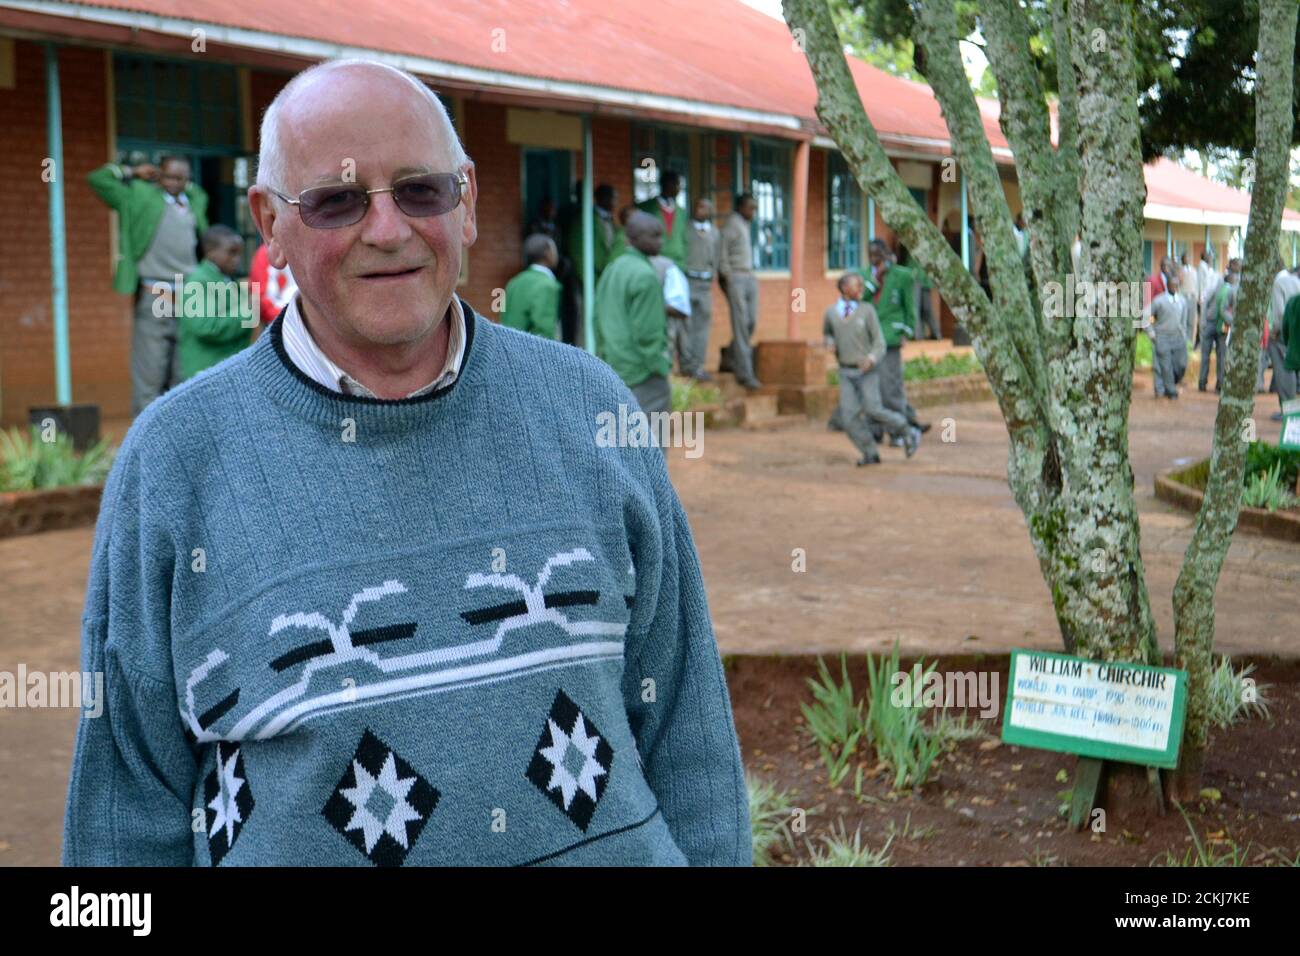 Brother Colm O'Connell poses for a photo at St Patrick's High School, where trees have been planted to honour former pupils who have gone on to become world champions, in Kenya's Iten village June 28, 2012. O'Connell, an Irish missionary who started the first athletics training camp in the Kenyan highlands, never imagined a small village in the Great Rift Valley would become a production line of running talent. Picture taken June 28, 2012. REUTERS/Drazen Jorgic (KENYA - Tags: SPORT ATHLETICS OLYMPICS) Stock Photo